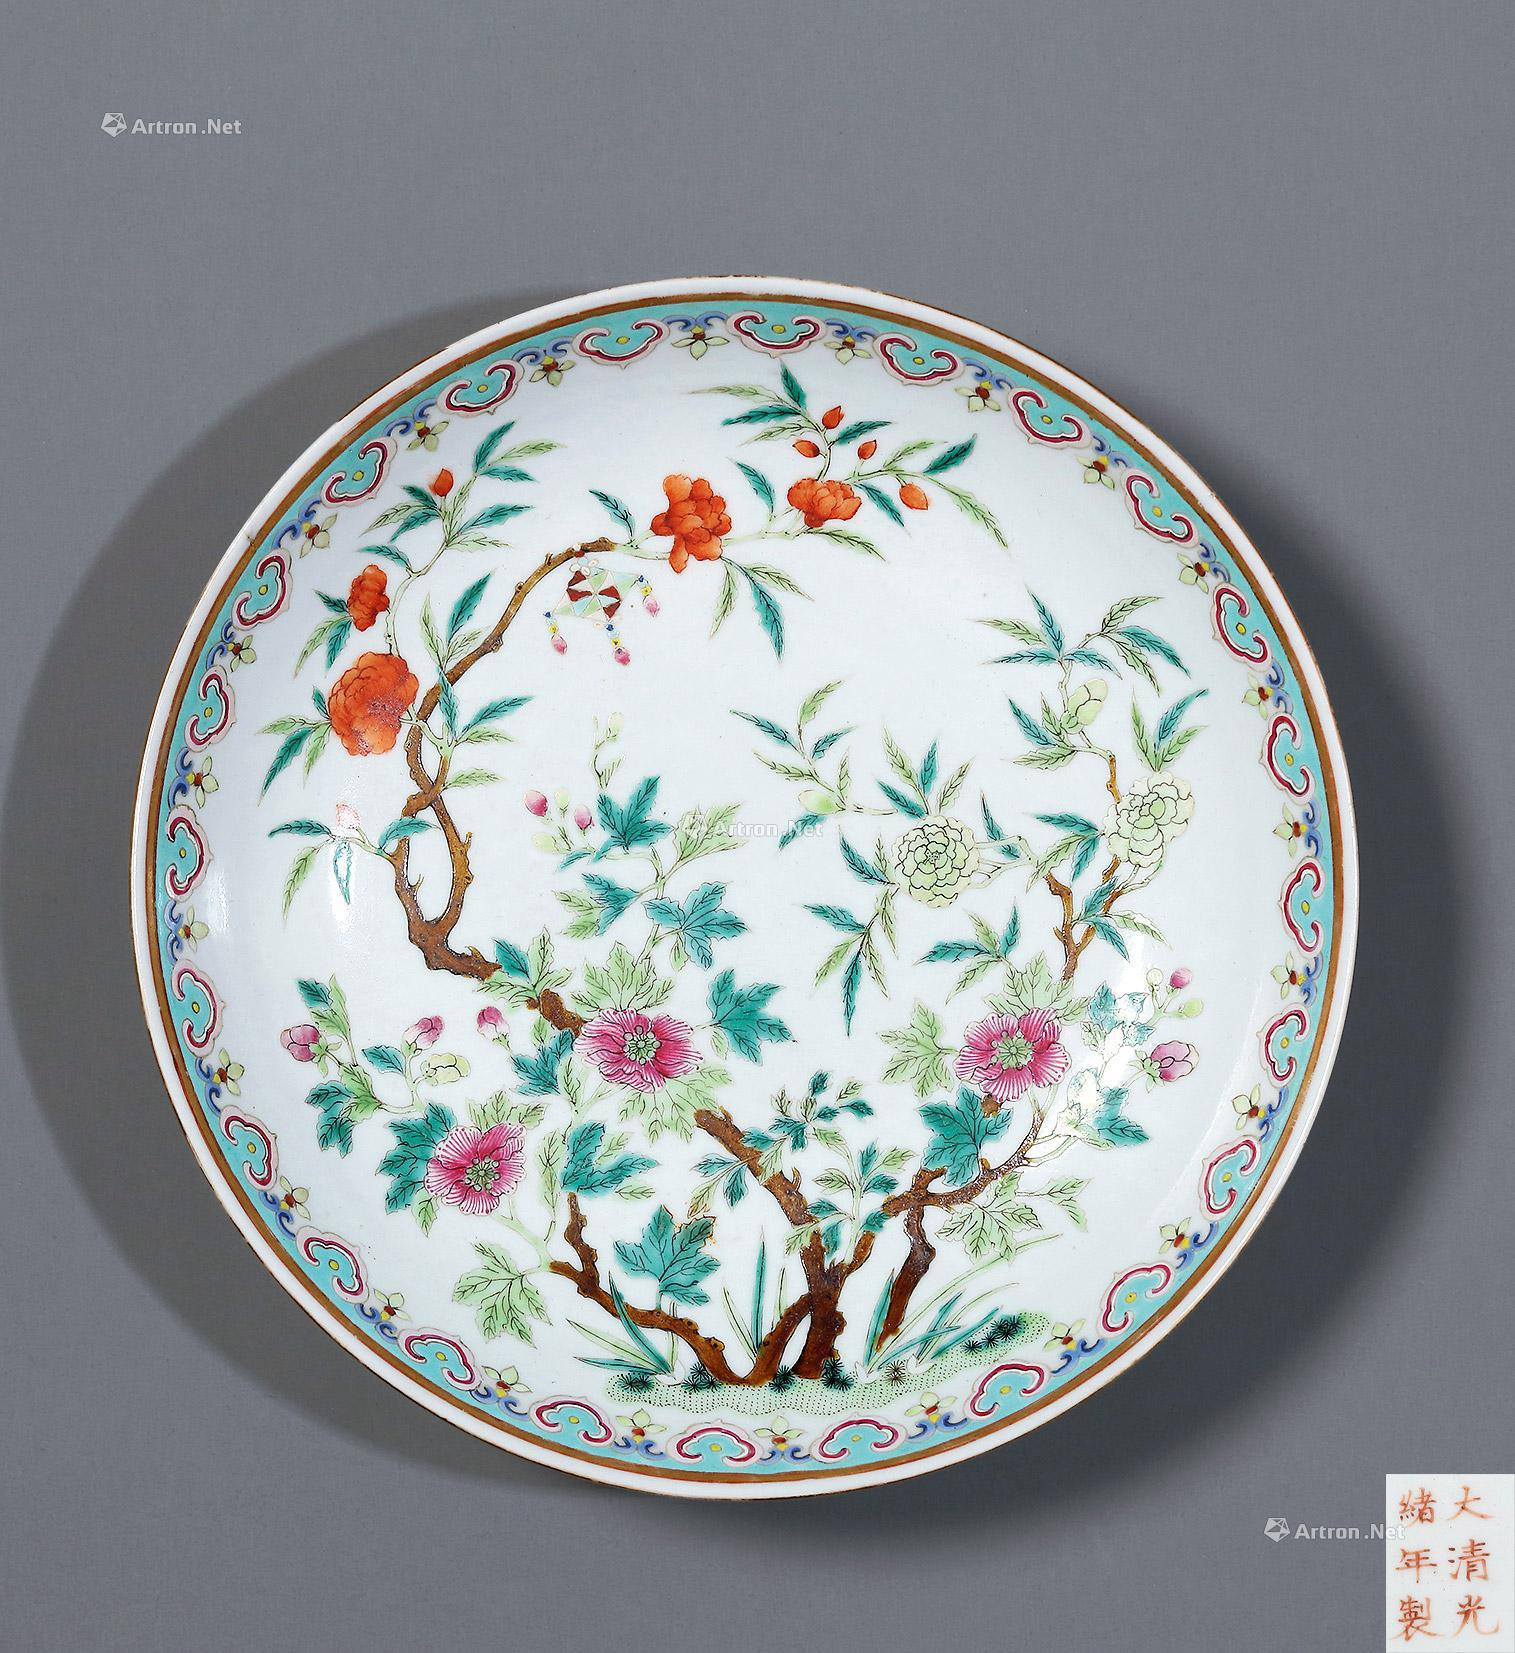 A FAMILLE-ROSE FLOWERS PLATE